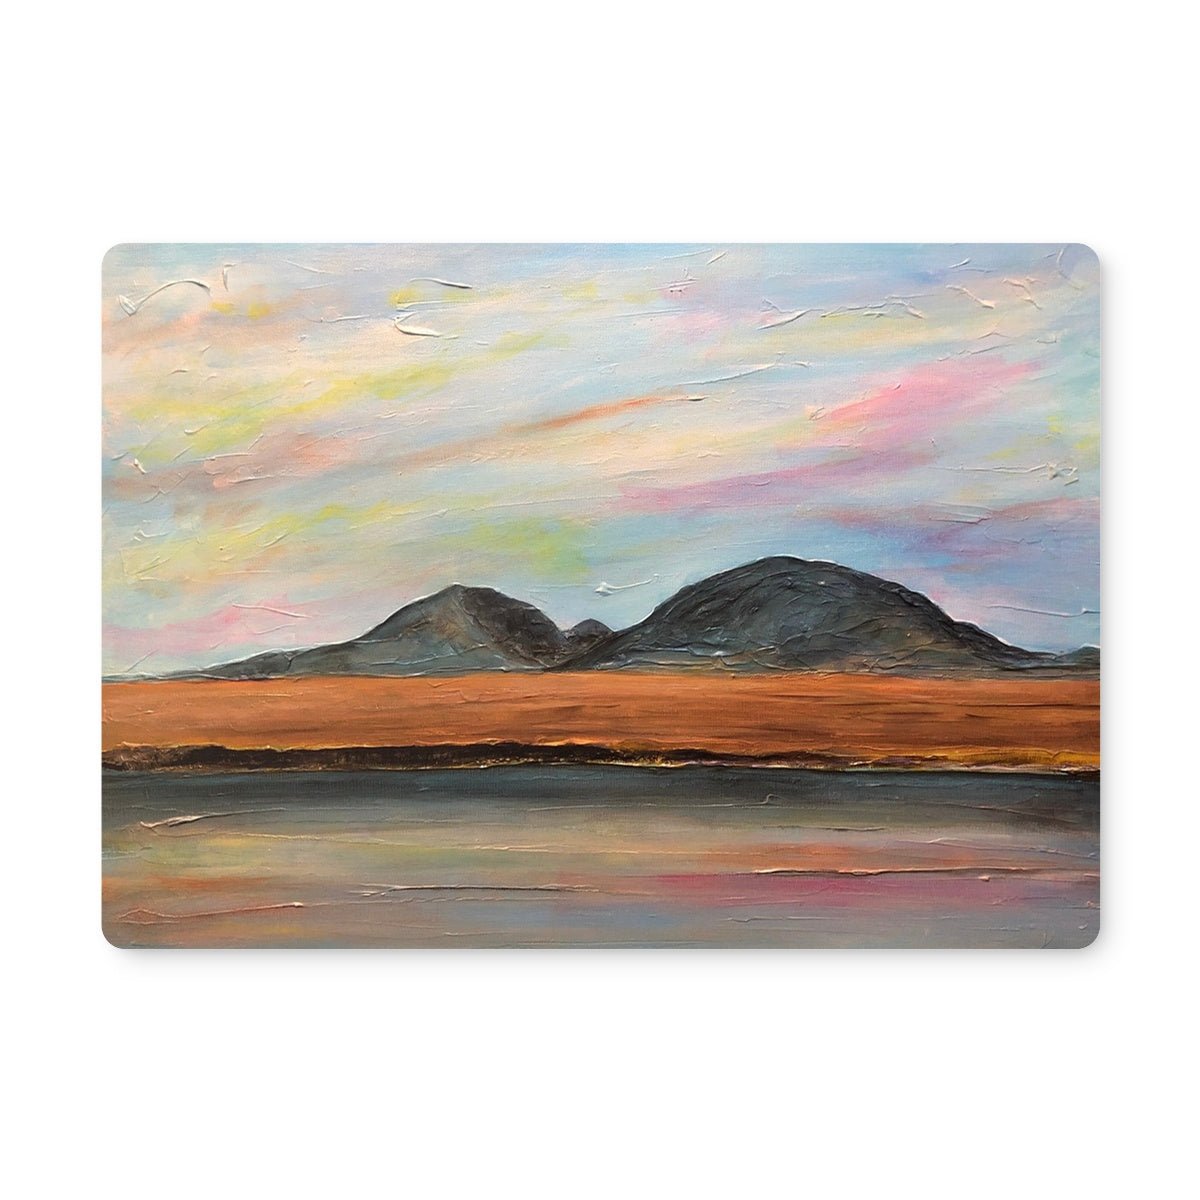 Jura Dawn Art Gifts Placemat-Placemats-Hebridean Islands Art Gallery-2 Placemats-Paintings, Prints, Homeware, Art Gifts From Scotland By Scottish Artist Kevin Hunter